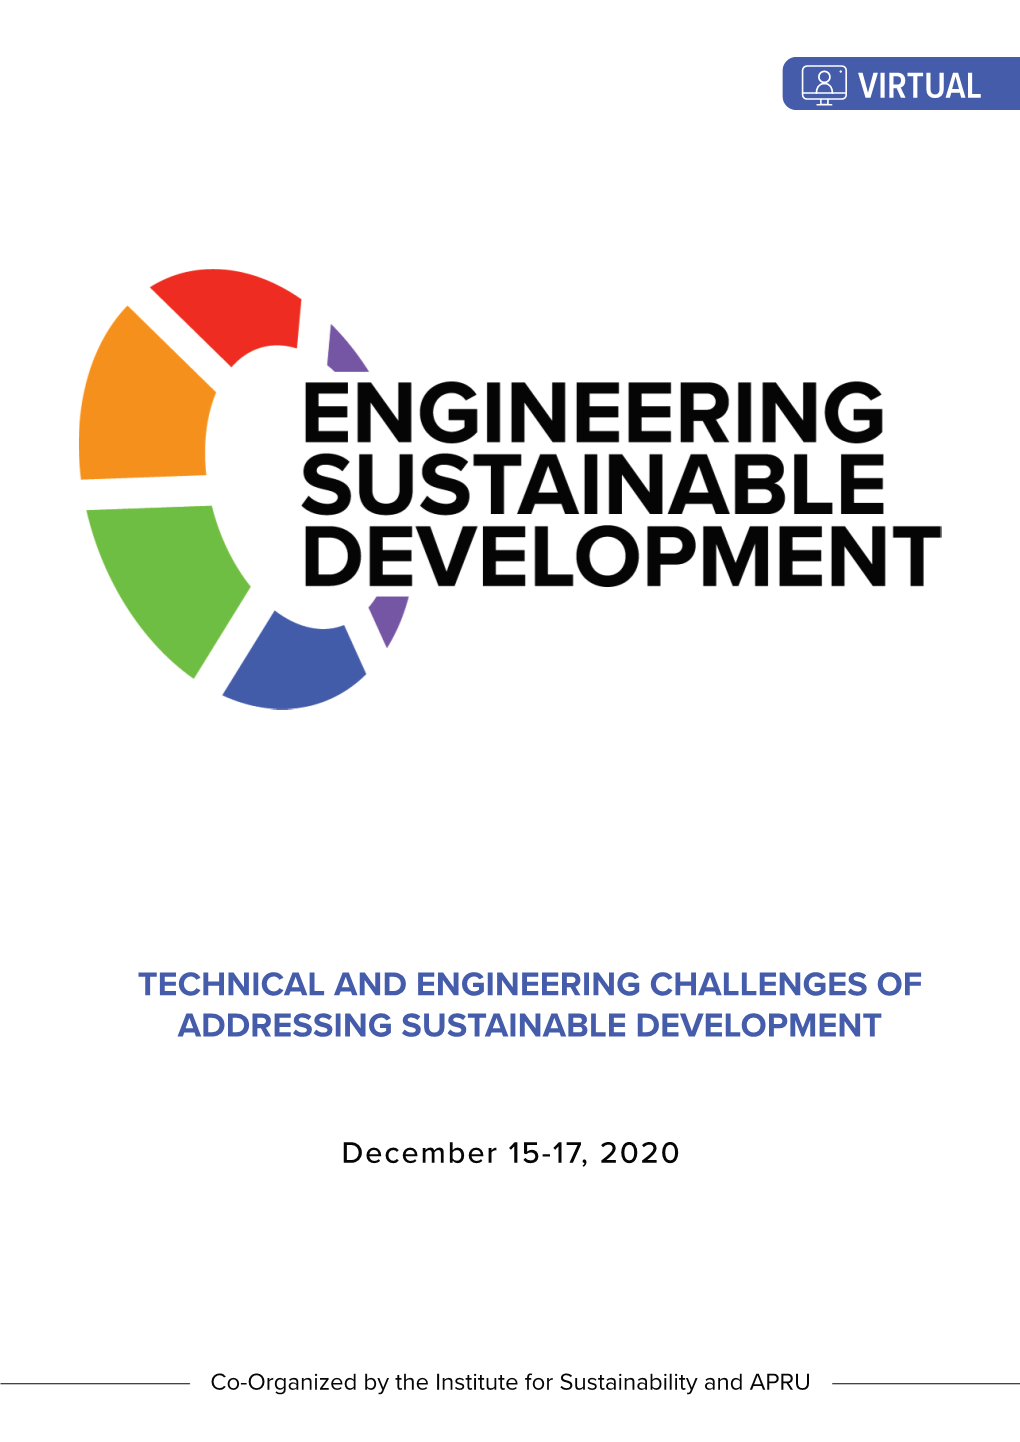 Technical and Engineering Challenges of Addressing Sustainable Development